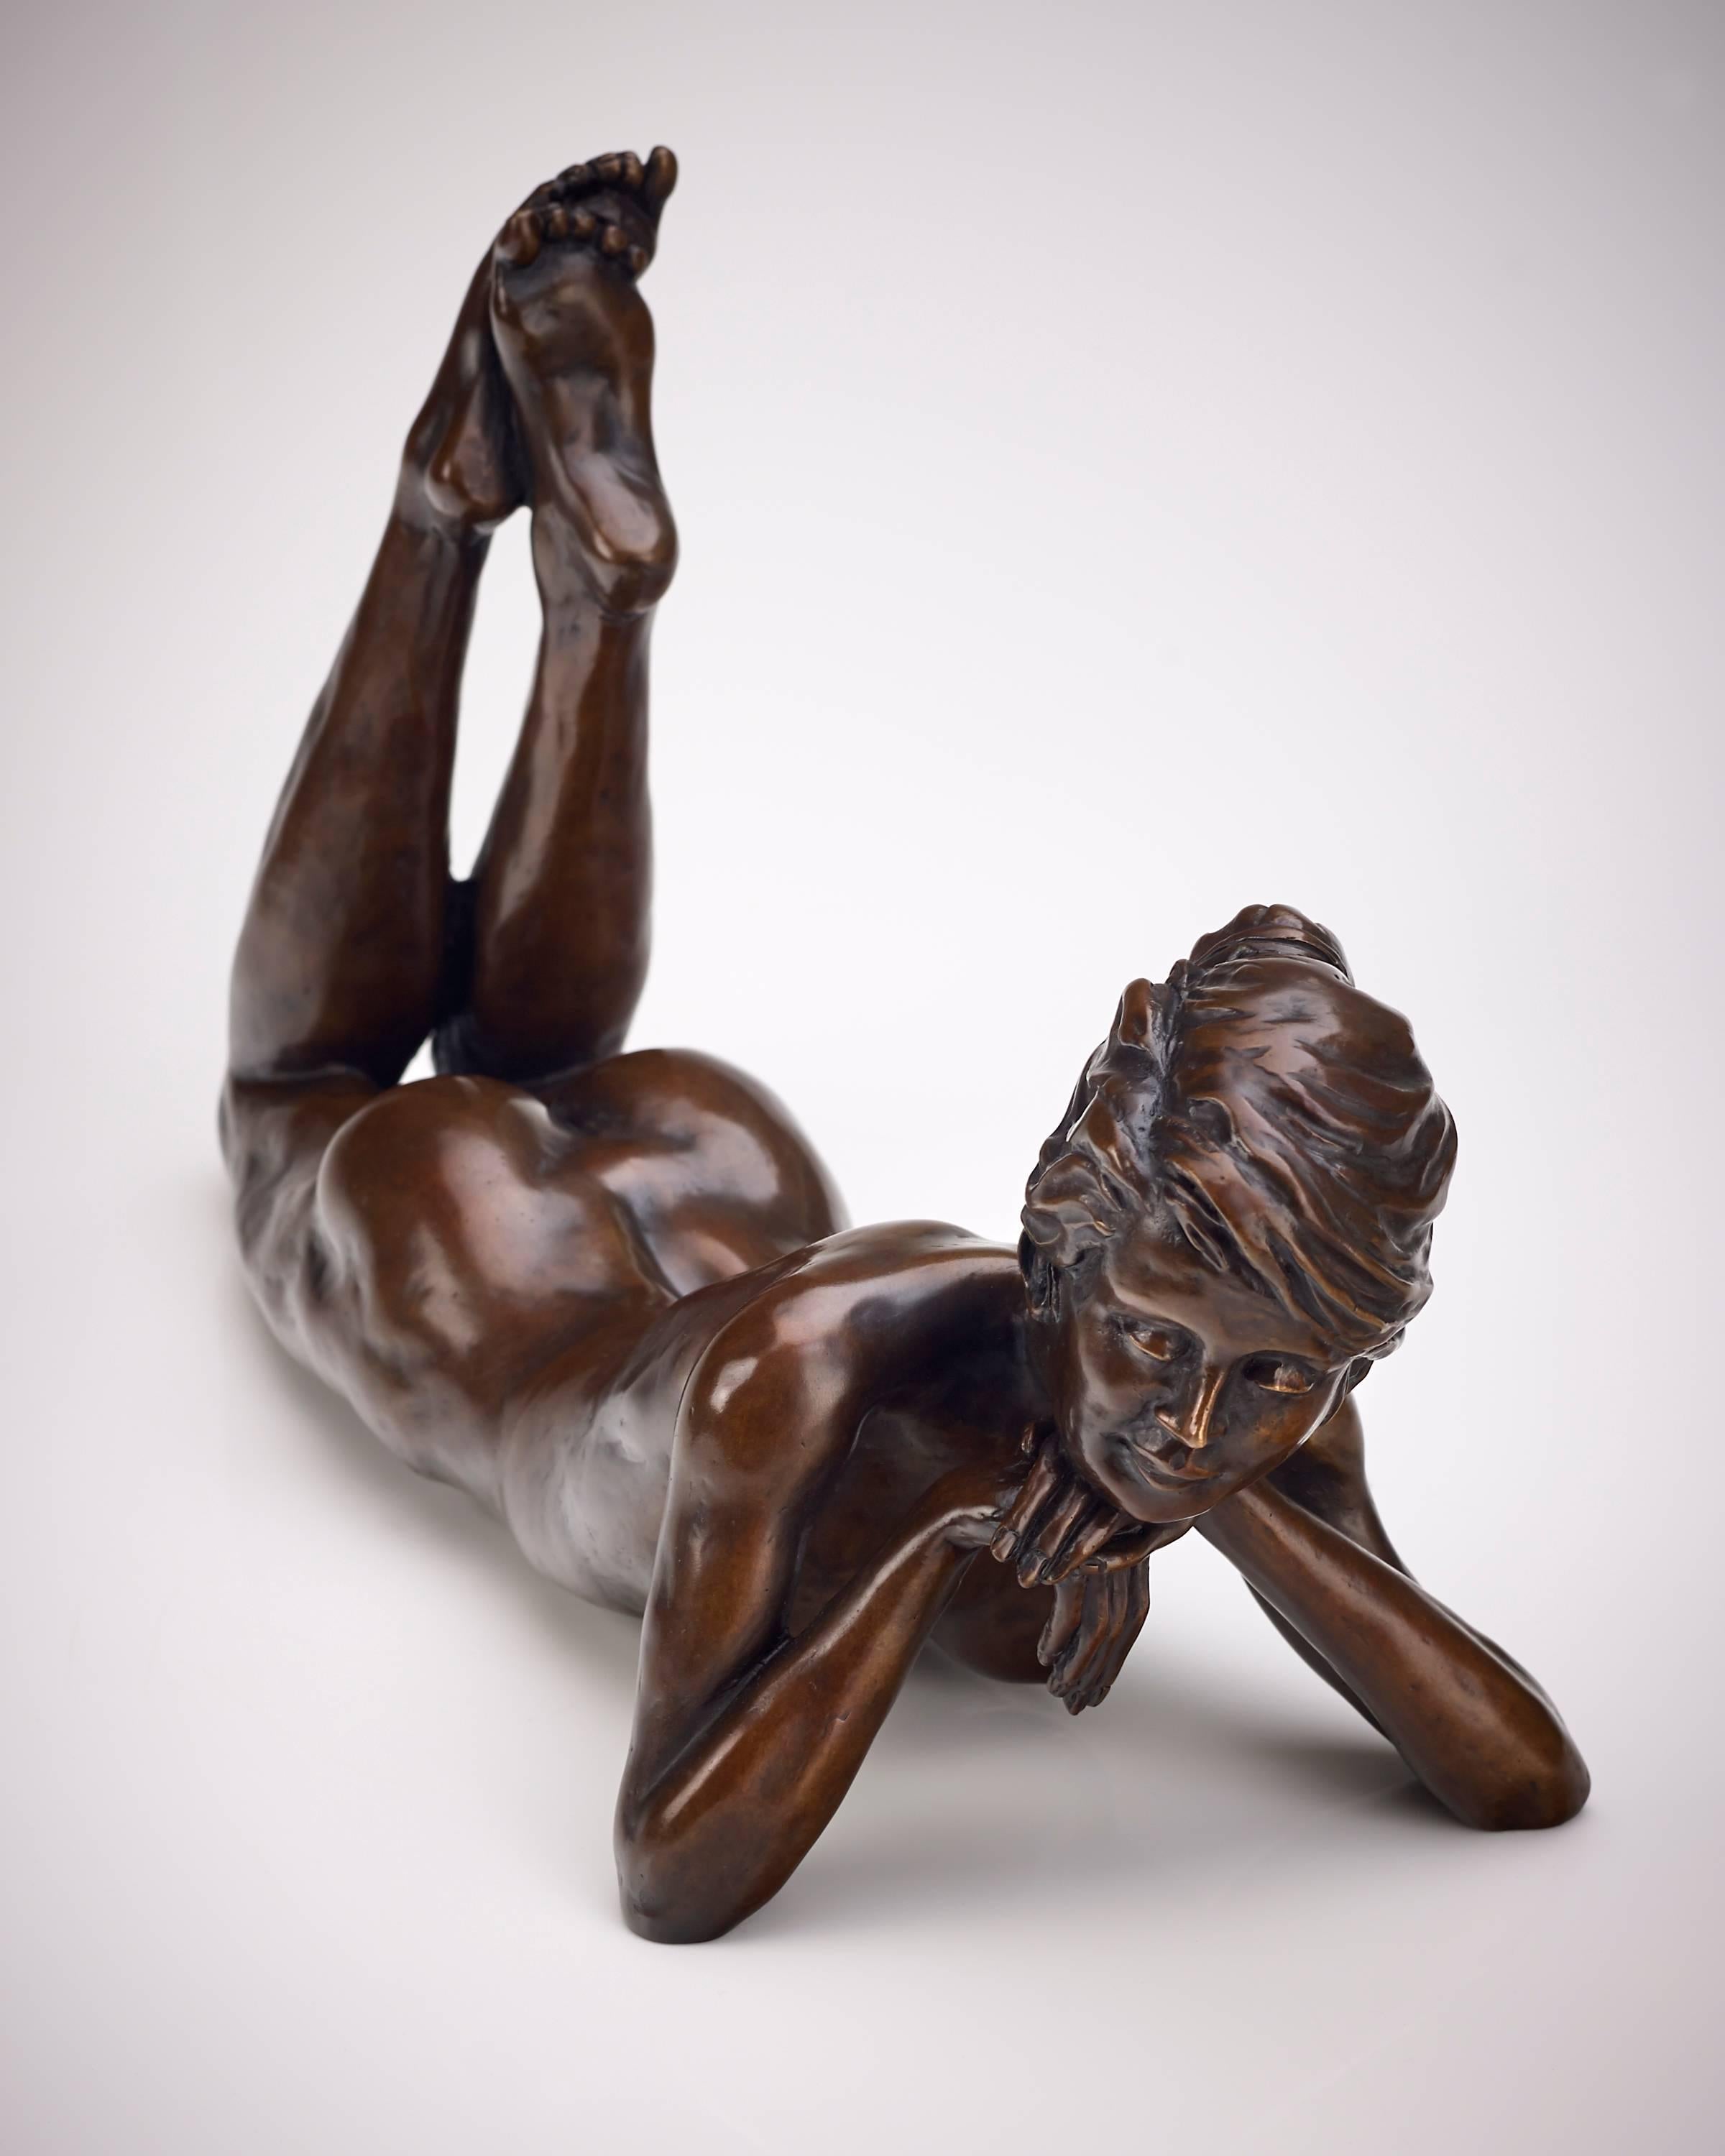 'Meditation' is a tasteful and demure nude of a ballet dancer. The poise and elegance of the dancer are exquisite!

For Benson Landes, sculpture was most definitely a passion. His oeuvre of cast bronzes is populated with ‘off duty’ ballet dancers,